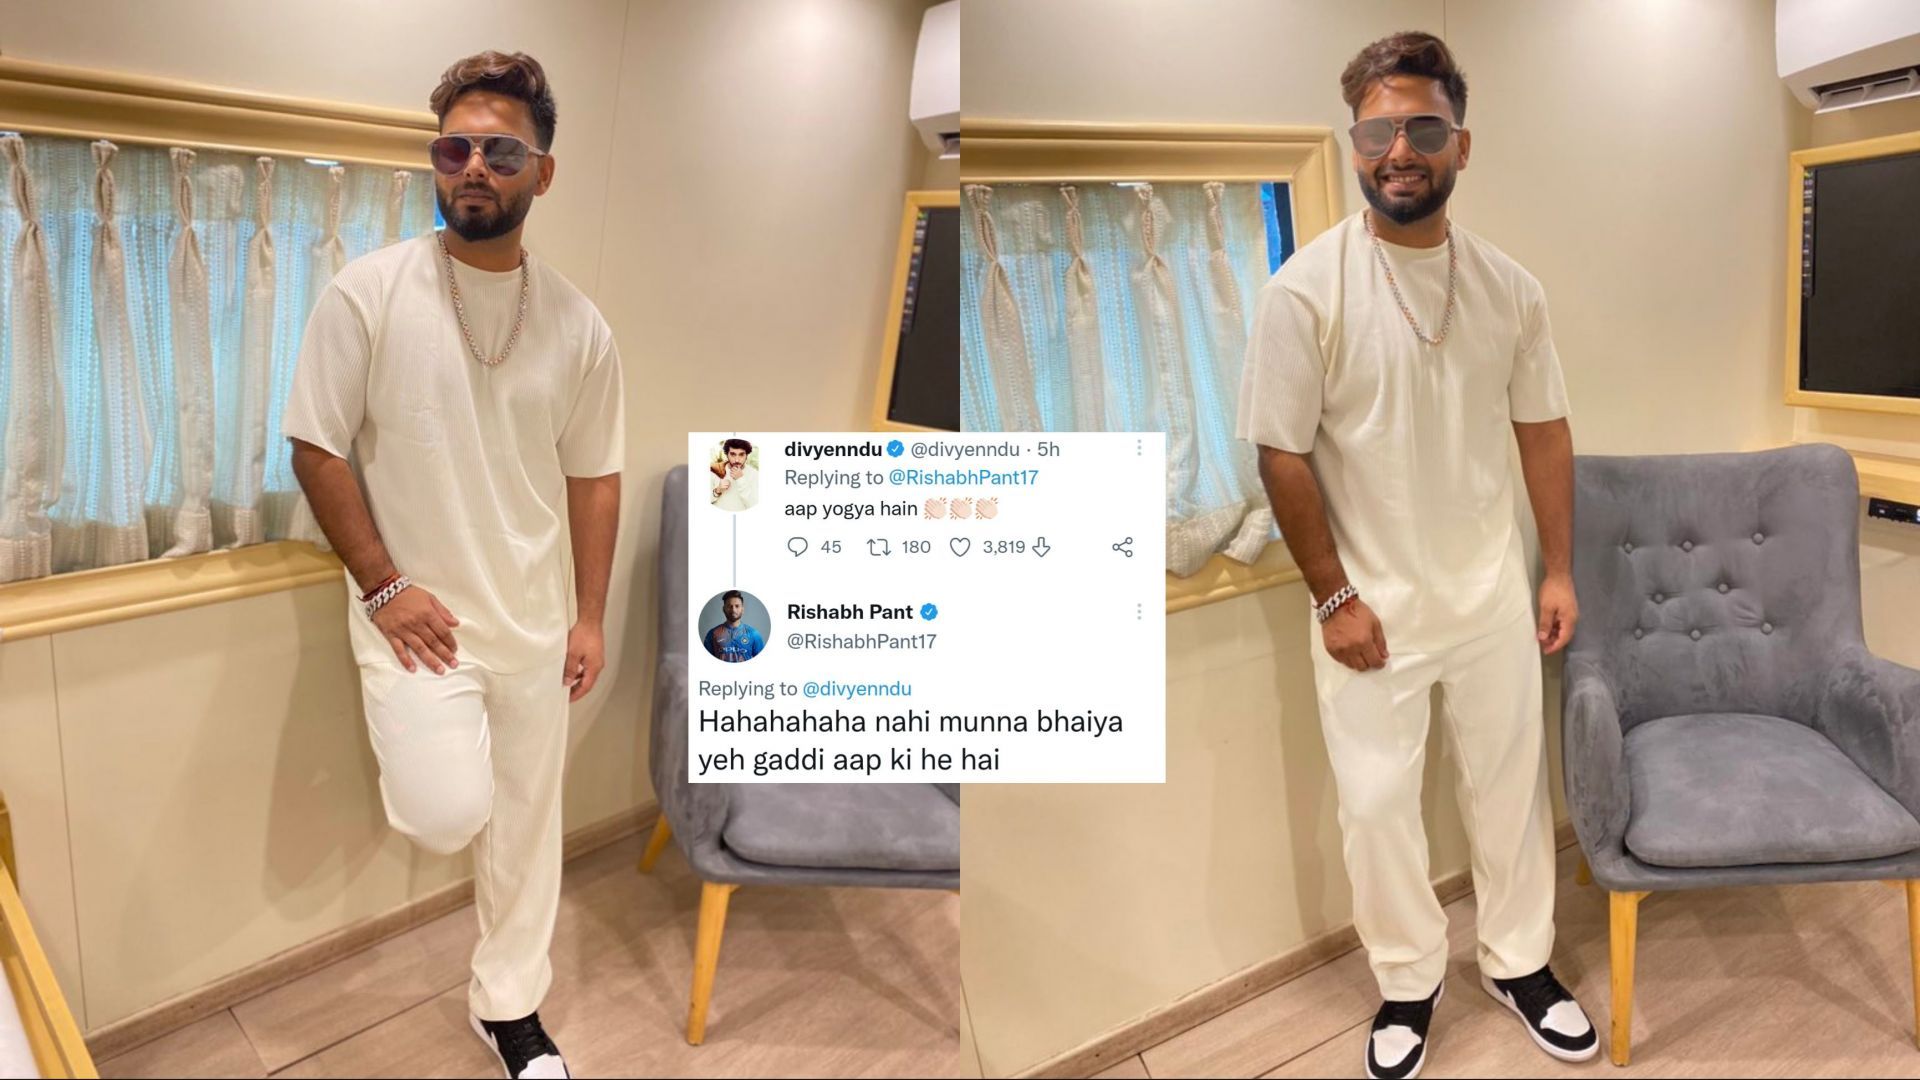 Rishabh Pant is very active on Twitter and does not mind showing off his sense of humor (Image Source: Twitter)